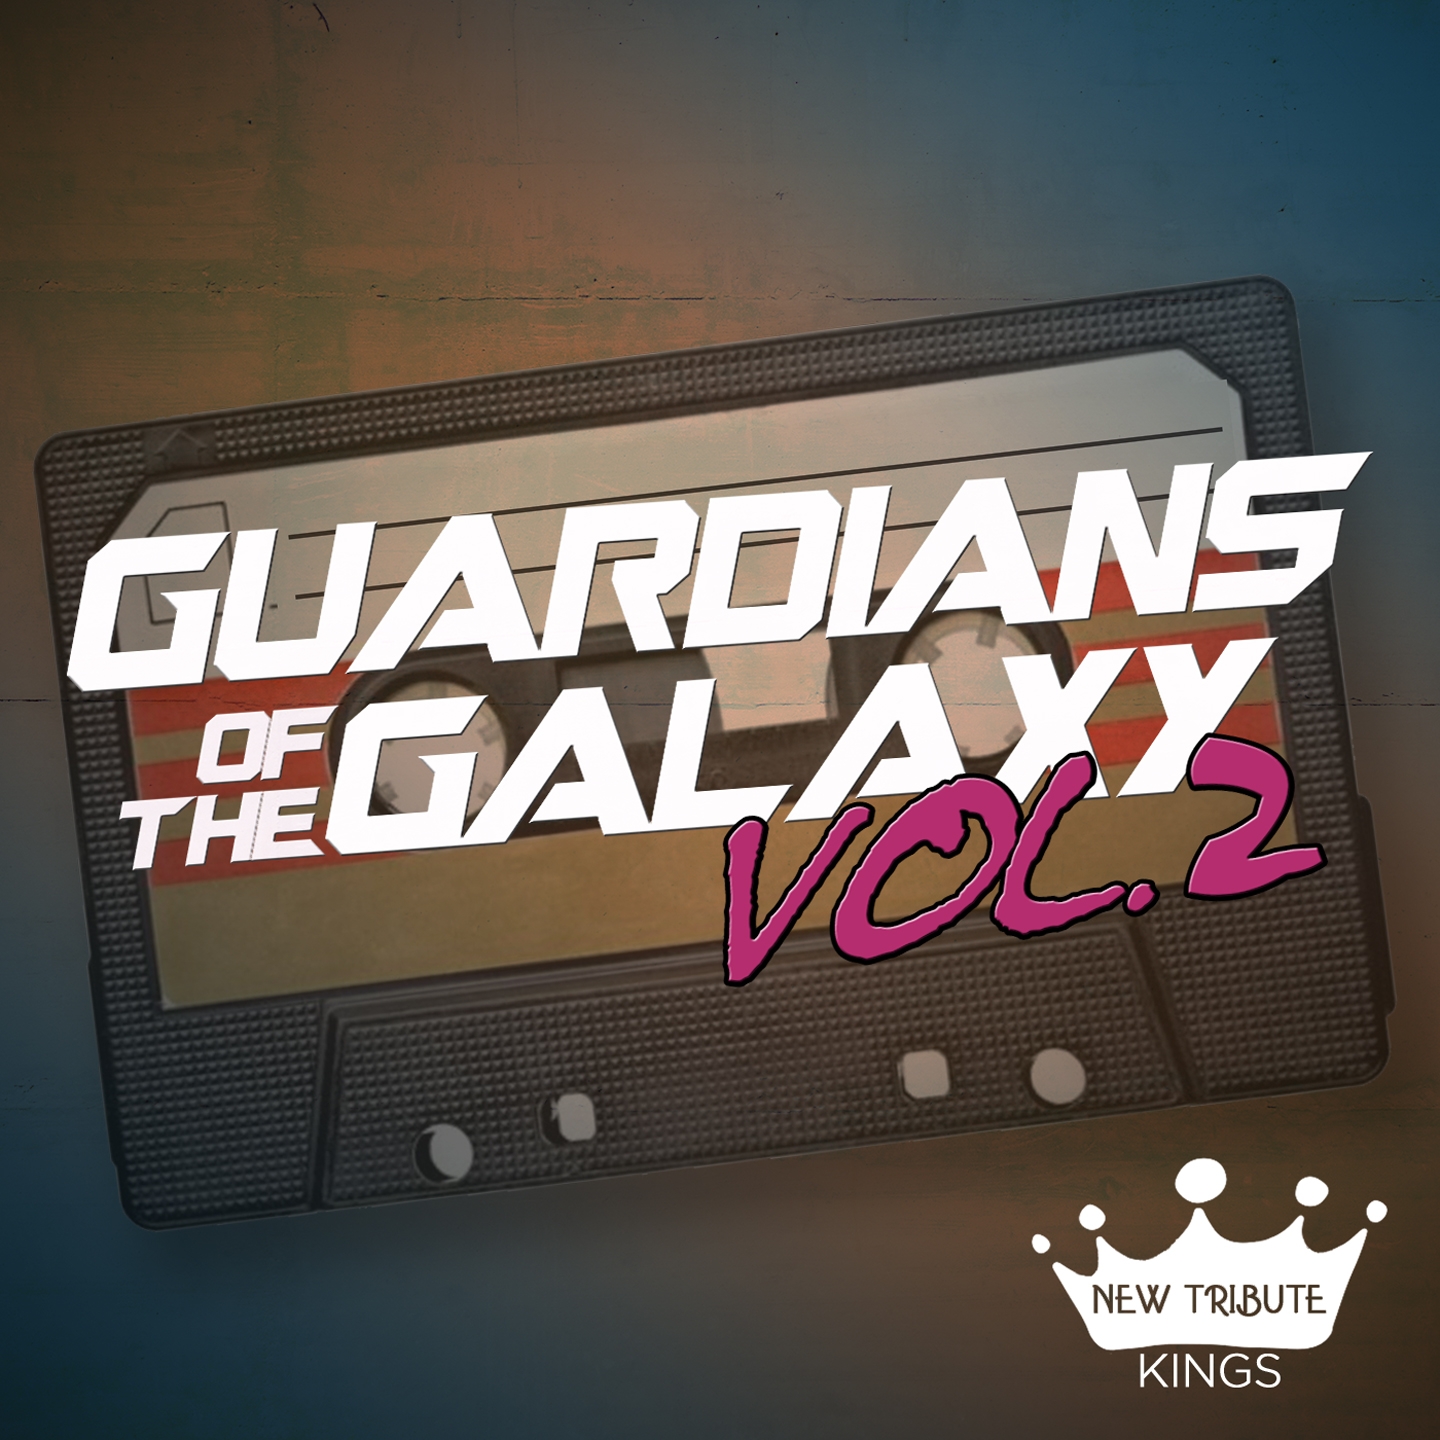 My Sweet Lord (Guardians of the Galaxy) (Originally Performed By George Harrison)